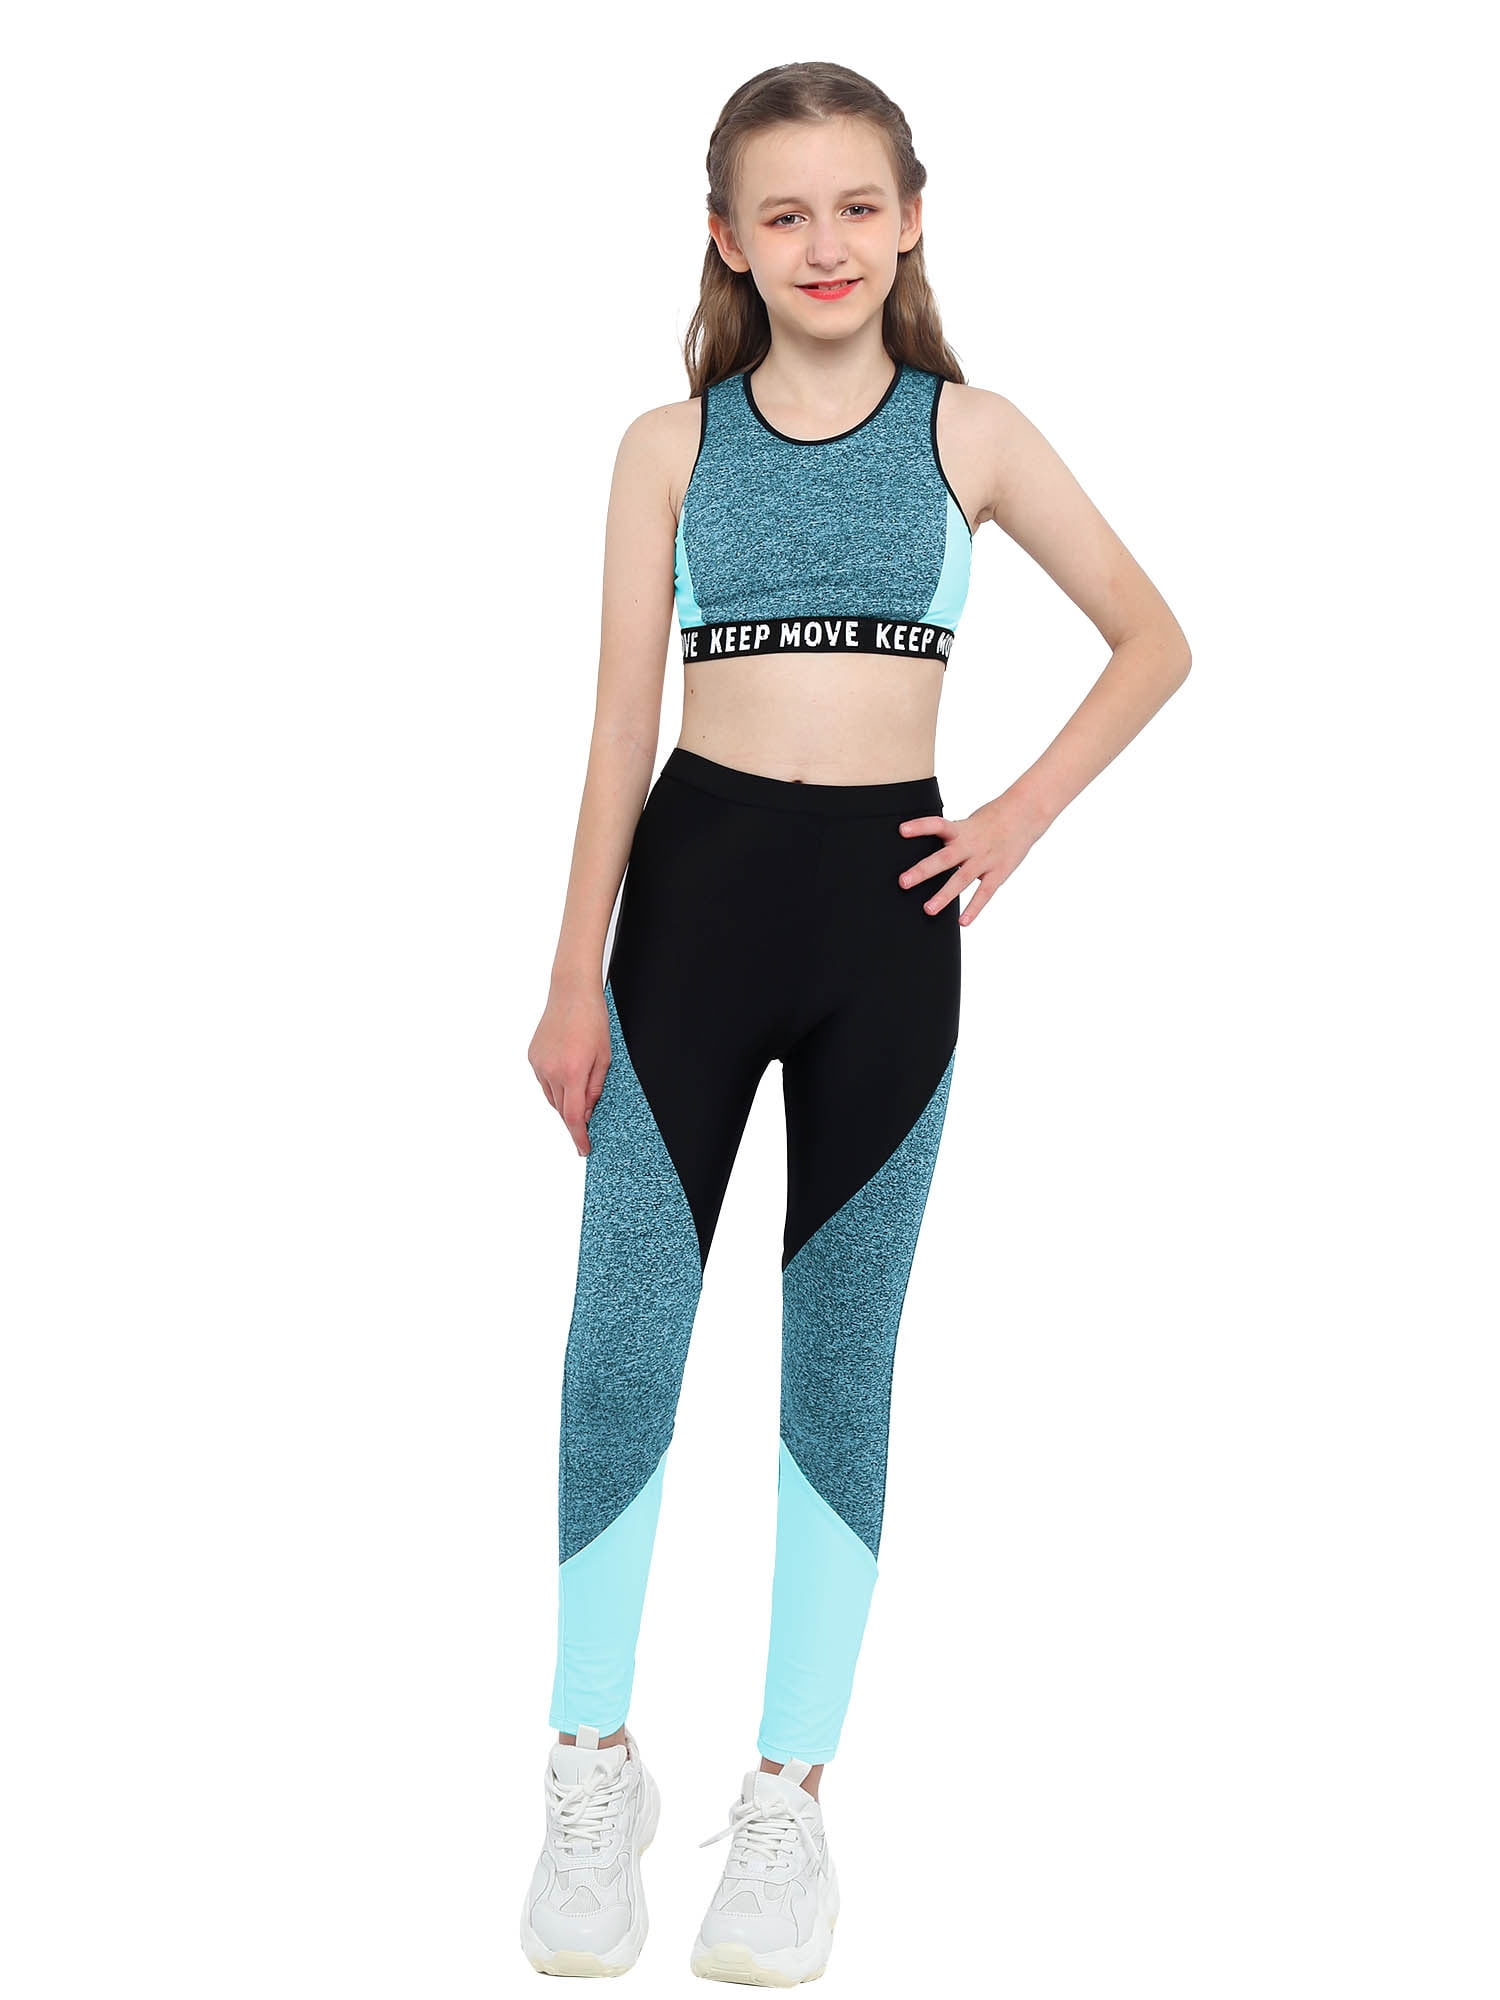 Aislor Kids Girls Two Piece Athletic Outfit Sports Bra Crop Top with Yoga  Leggings Gymnastics Dance Set Size 4-16 Grey 10 